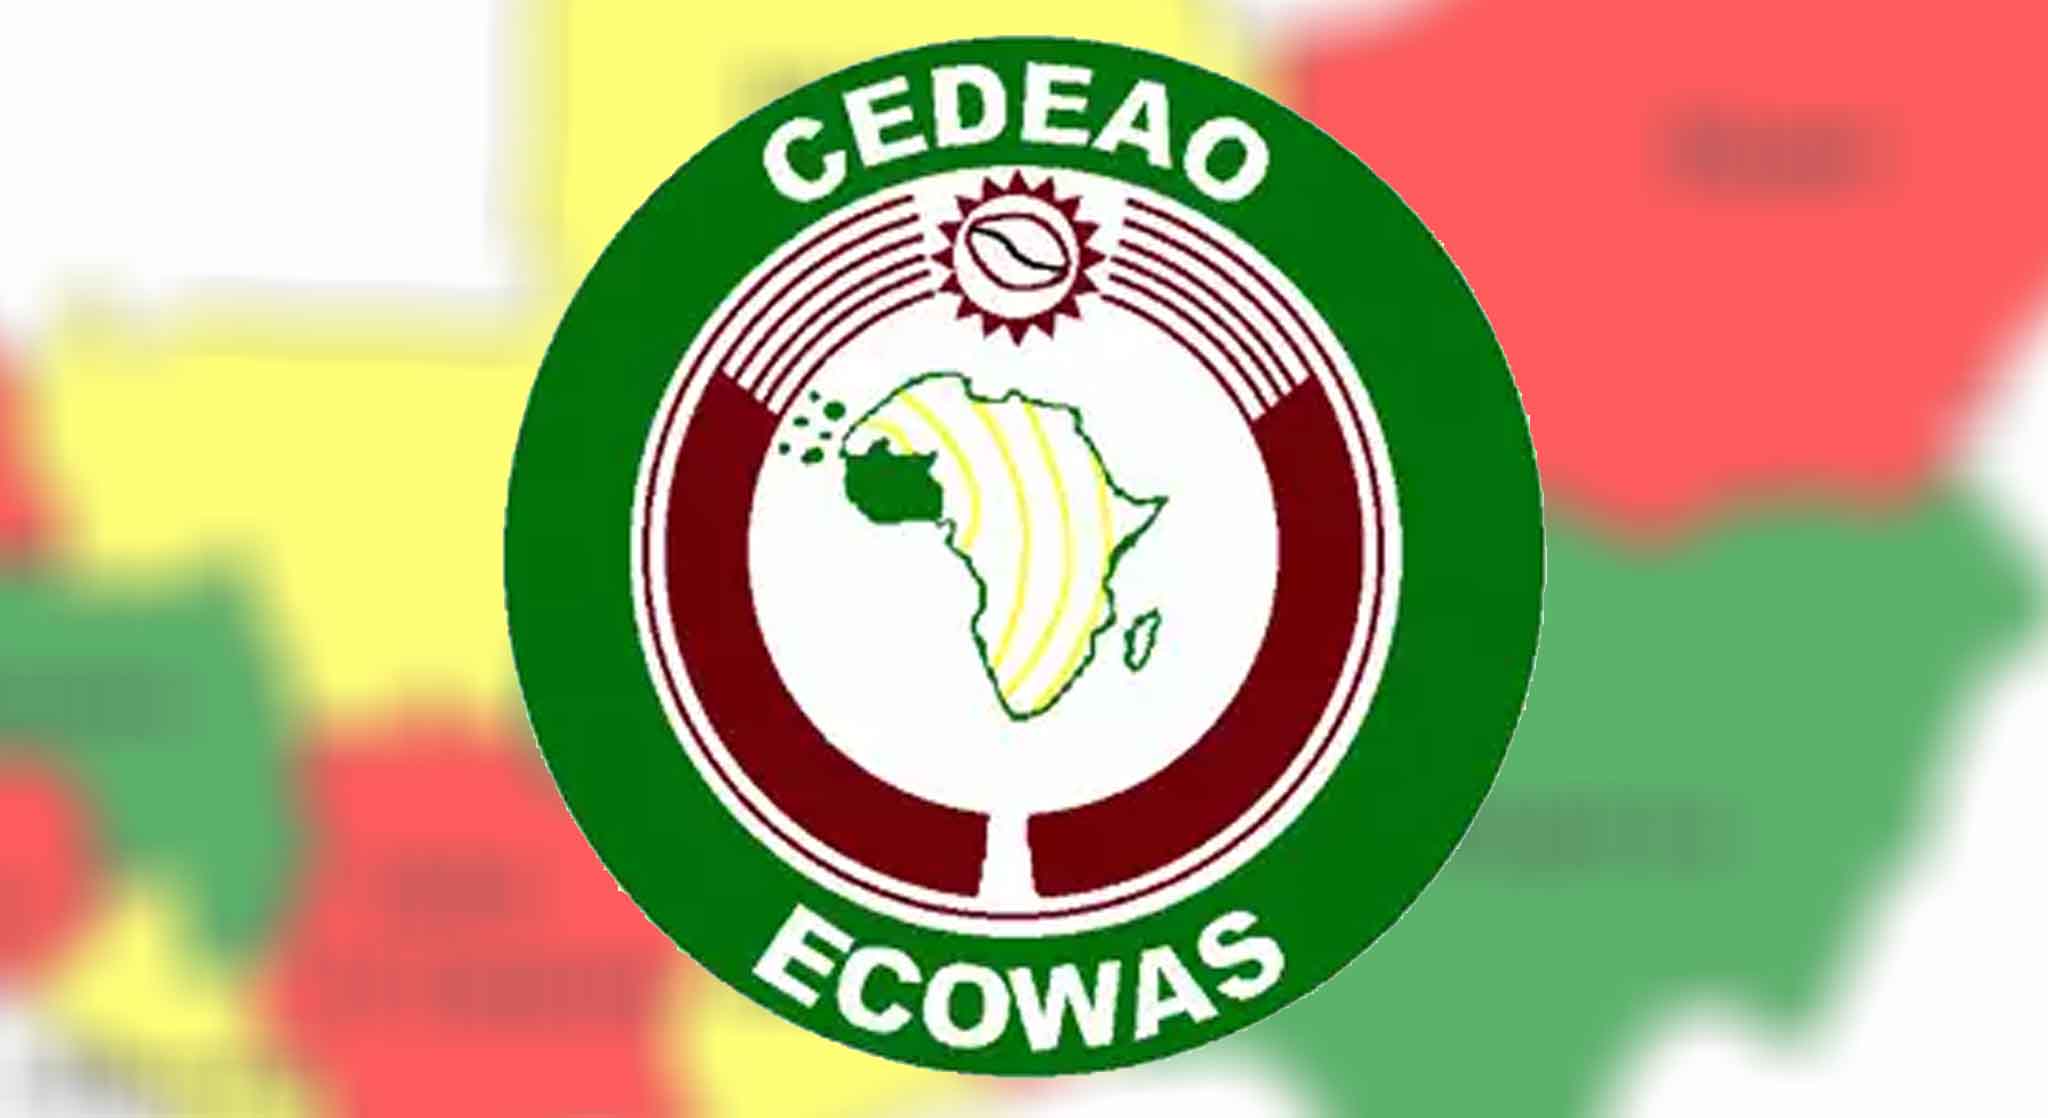 #EndSARS: ECOWAS Issued A Statement, Advised Nigerian Government On Way Forward